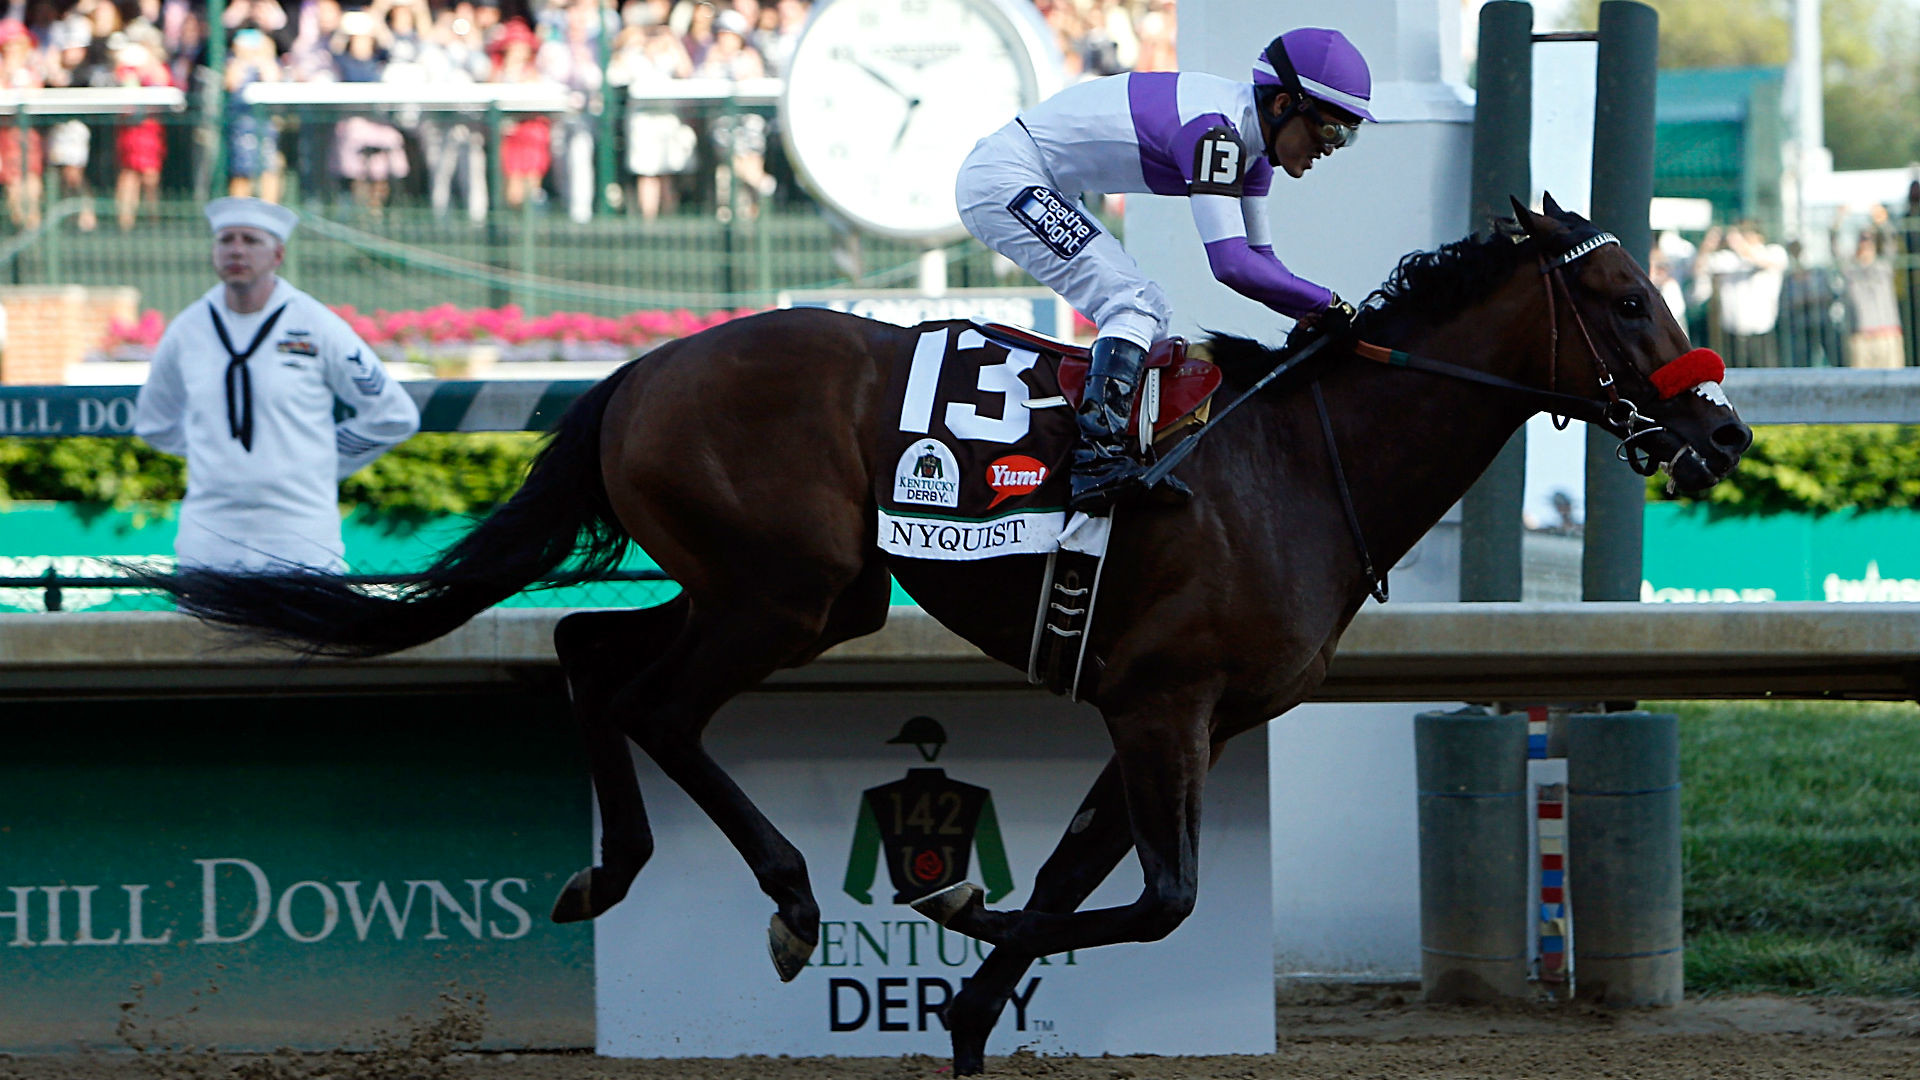 1920x1080 Kentucky Derby 2016: Watch a replay of Nyquist's win | Other Sports |  Sporting News